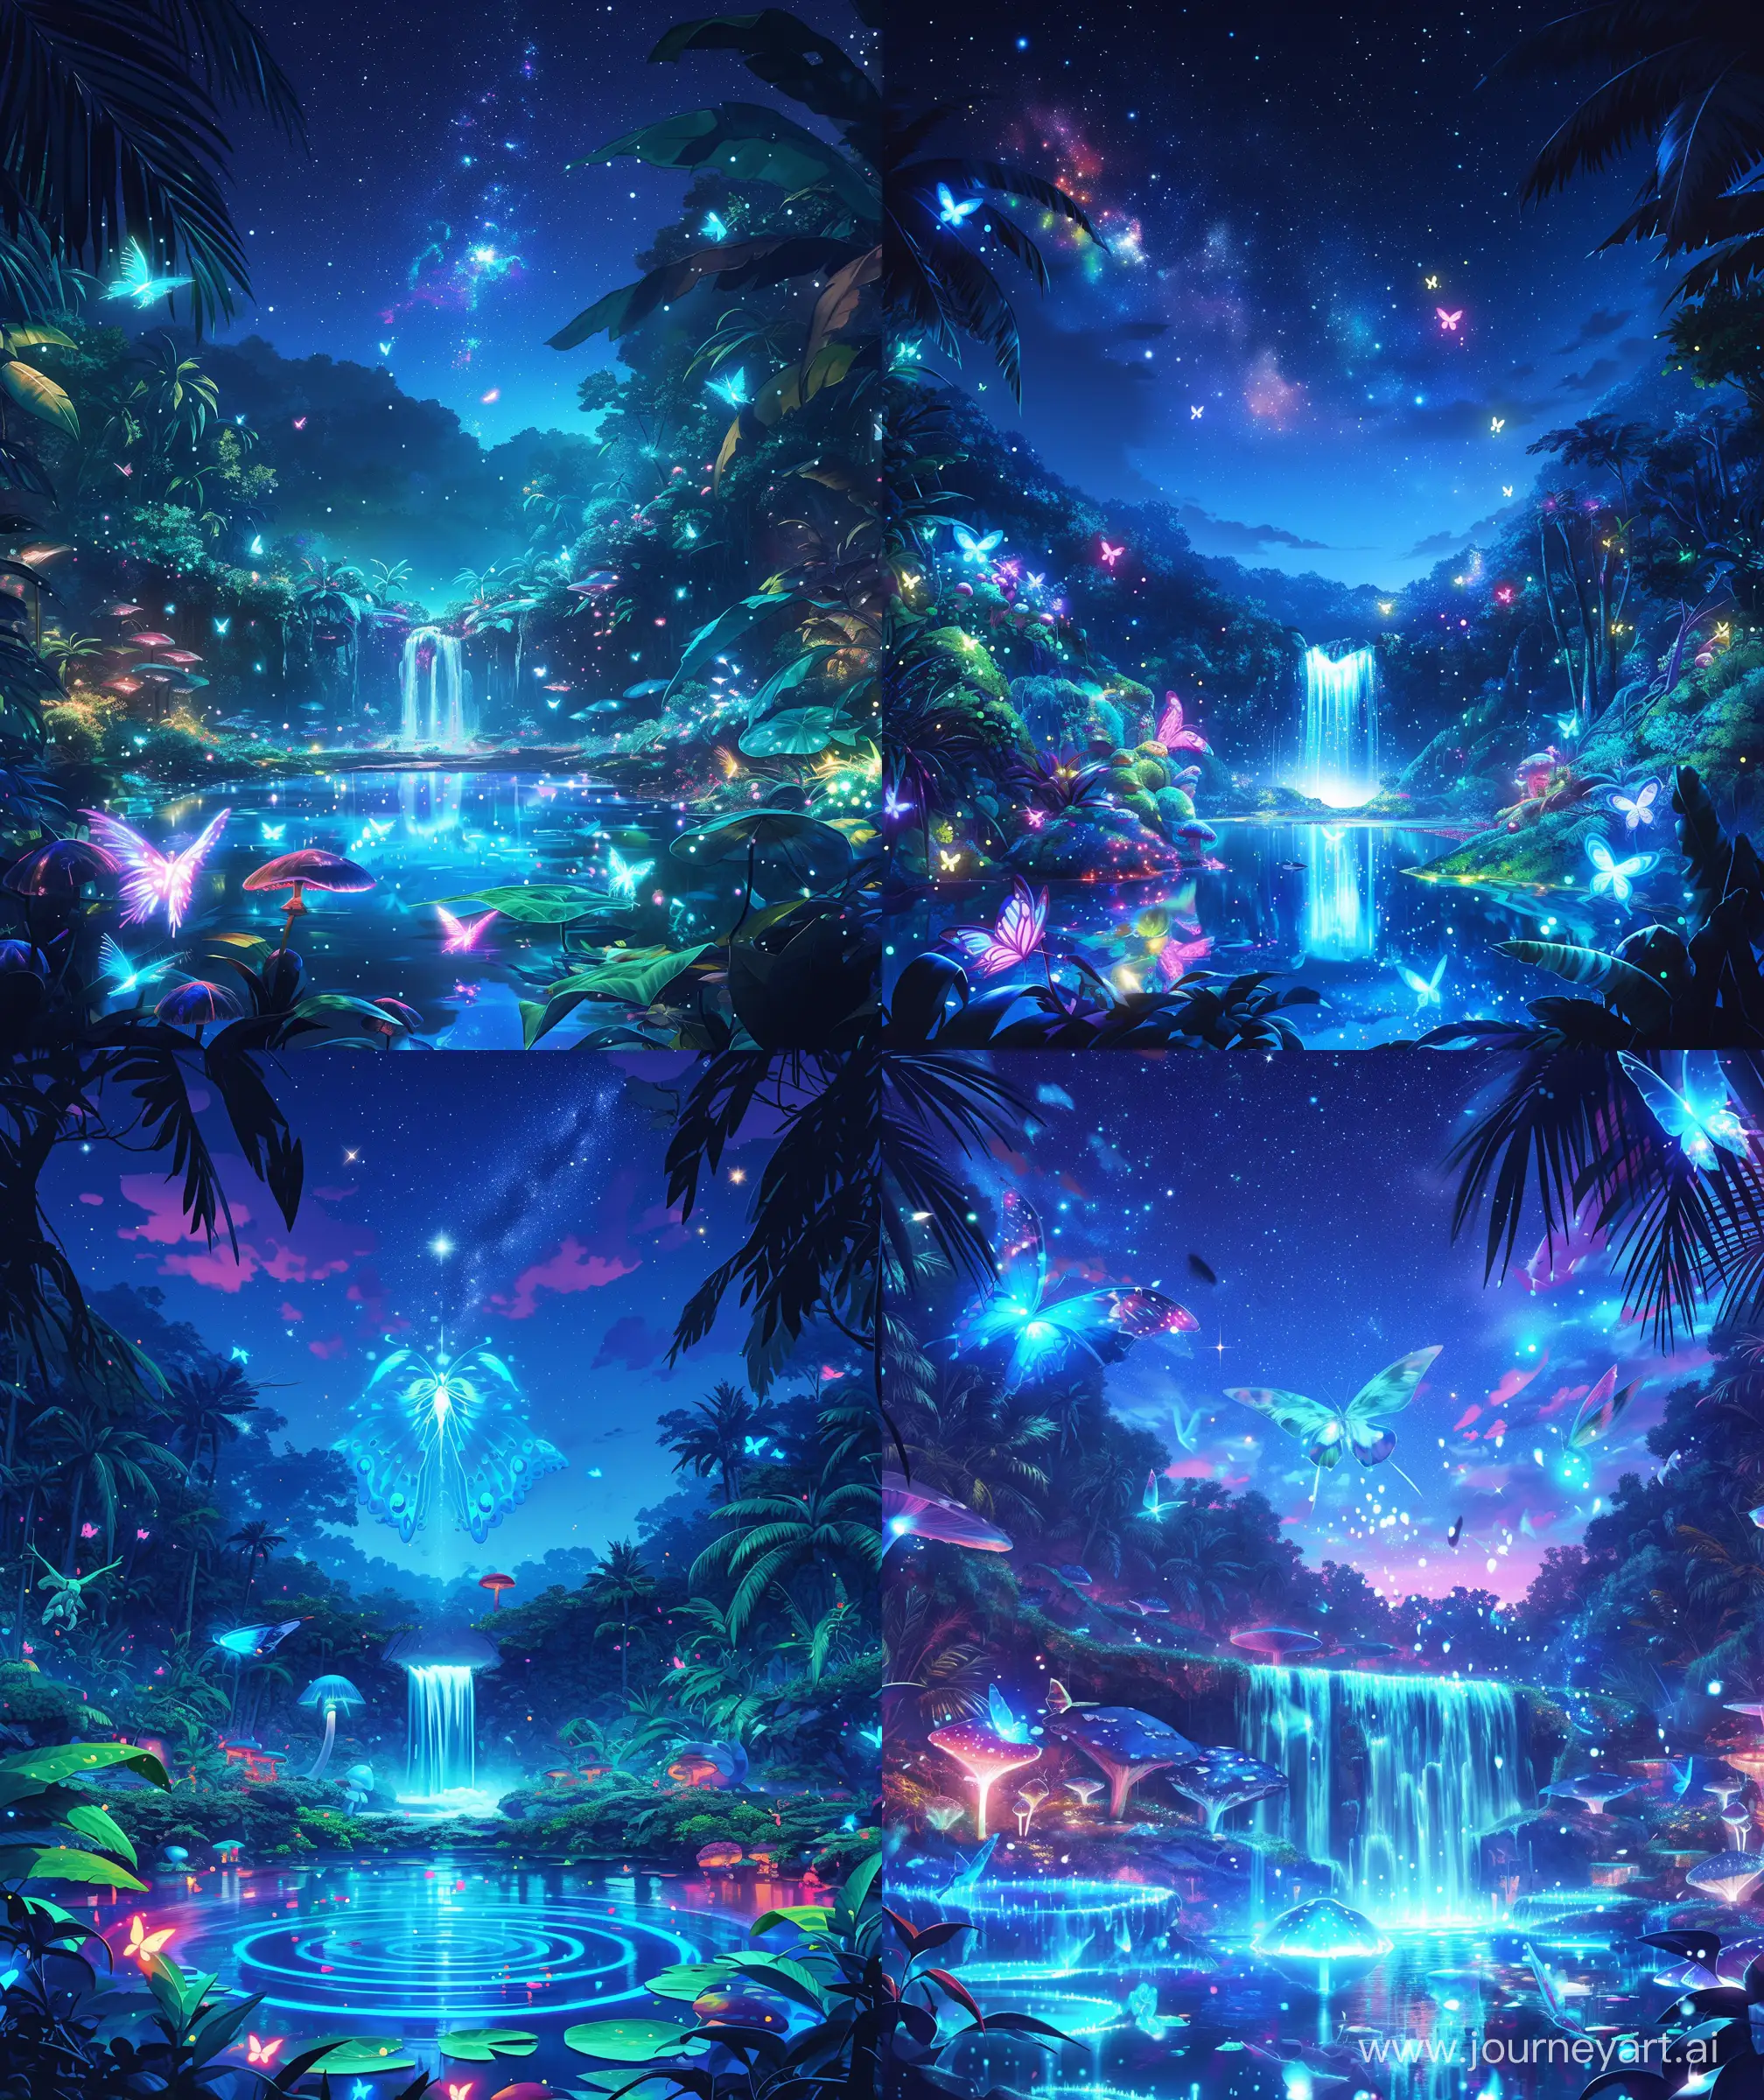 Mokoto shinkai style, Anime Artwork of a secret oasis nestled in the heart of a jungle, illuminated by the ethereal glow of bioluminescence under a starry night sky. A grande bioluminescent waterfall cascades, reflecting the celestial dance above. The scene is painted with mesmerizing hues of blues, pinks, and greens, as glowing butterflies and mushrooms add to the enchantment. Nature’s 7th wonder captured in the iconic style of studio Ghibli ,ultra HD , high quality, sharp details, --ar 27:32 --niji 6